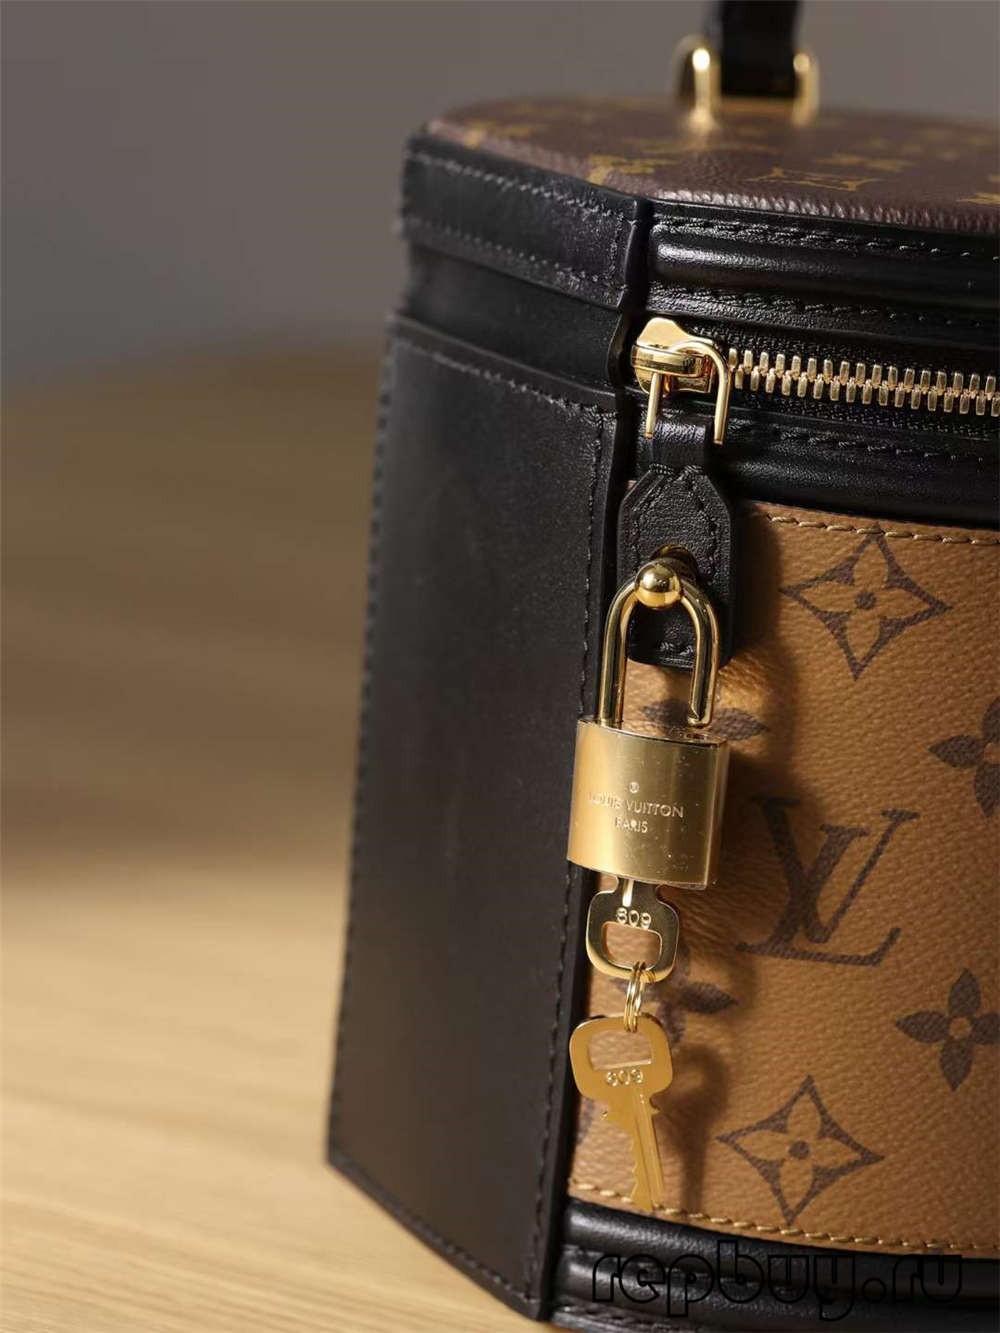 Louis Vuitton M43986 CANNES top replica handbags Hardware and stitching details (2022 Latest)-Best Quality Fake designer Bag Review, Replica designer bag ru